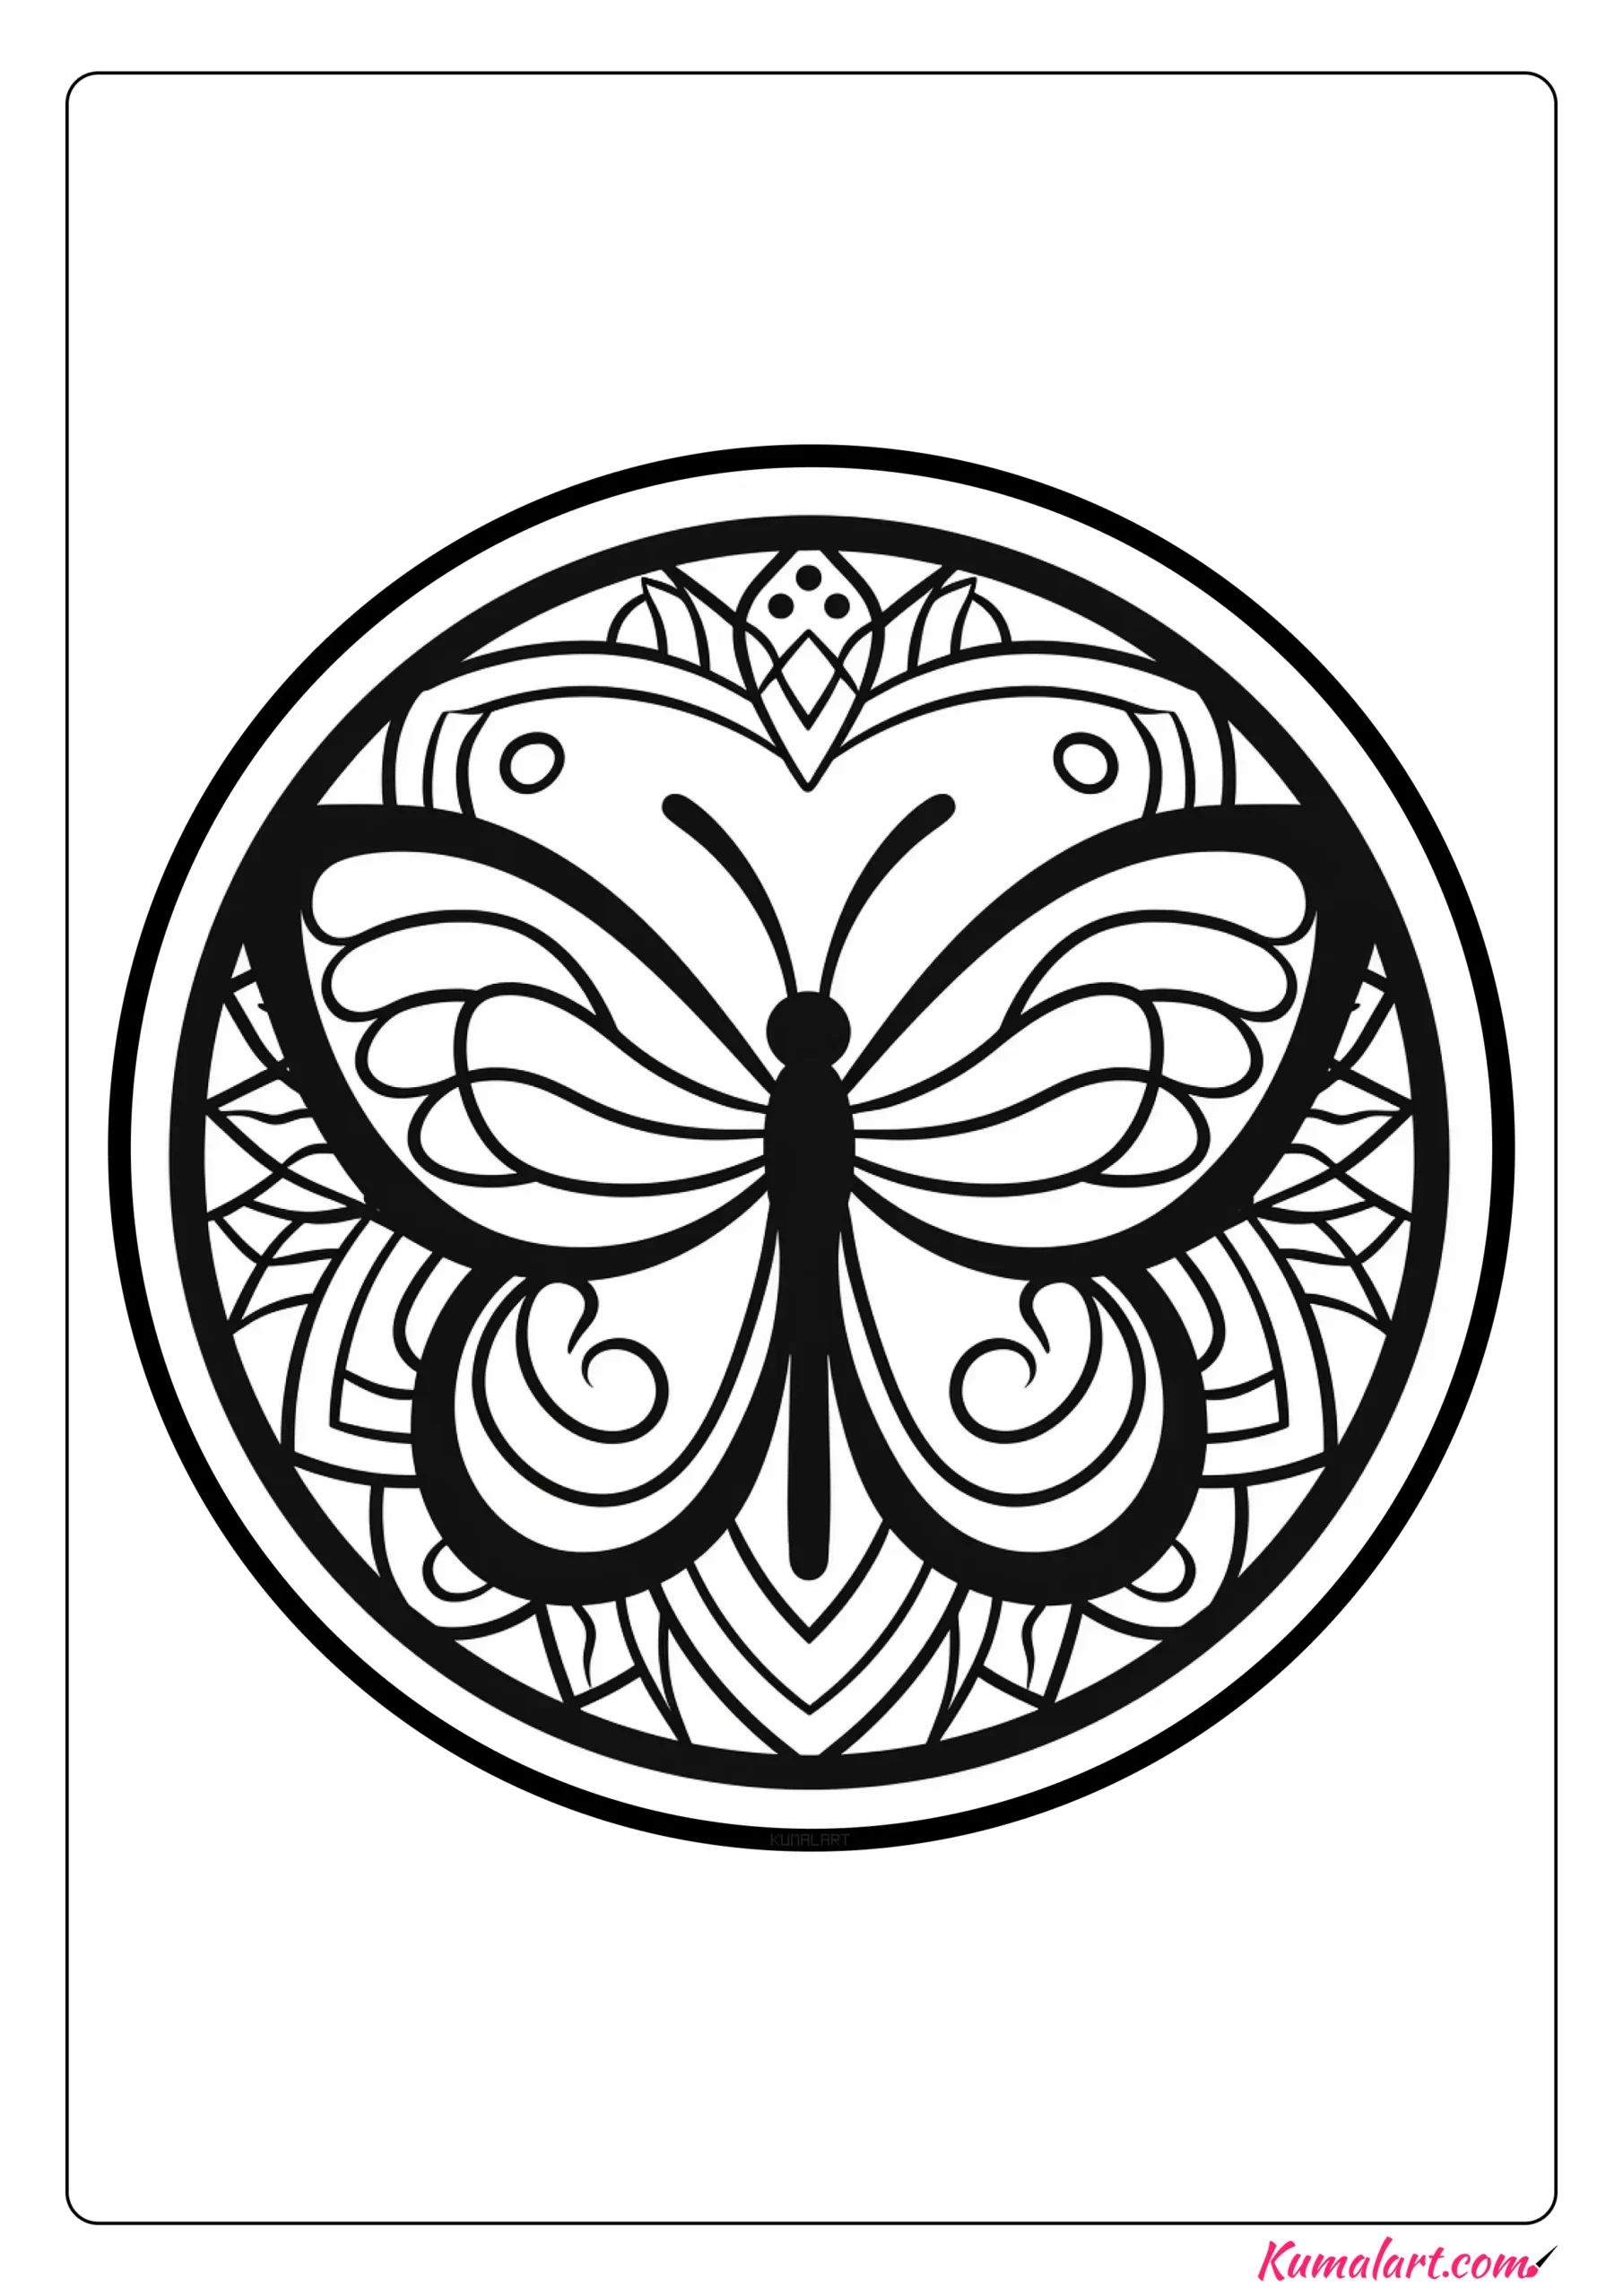 Steve the Butterfly Mandala Coloring Page